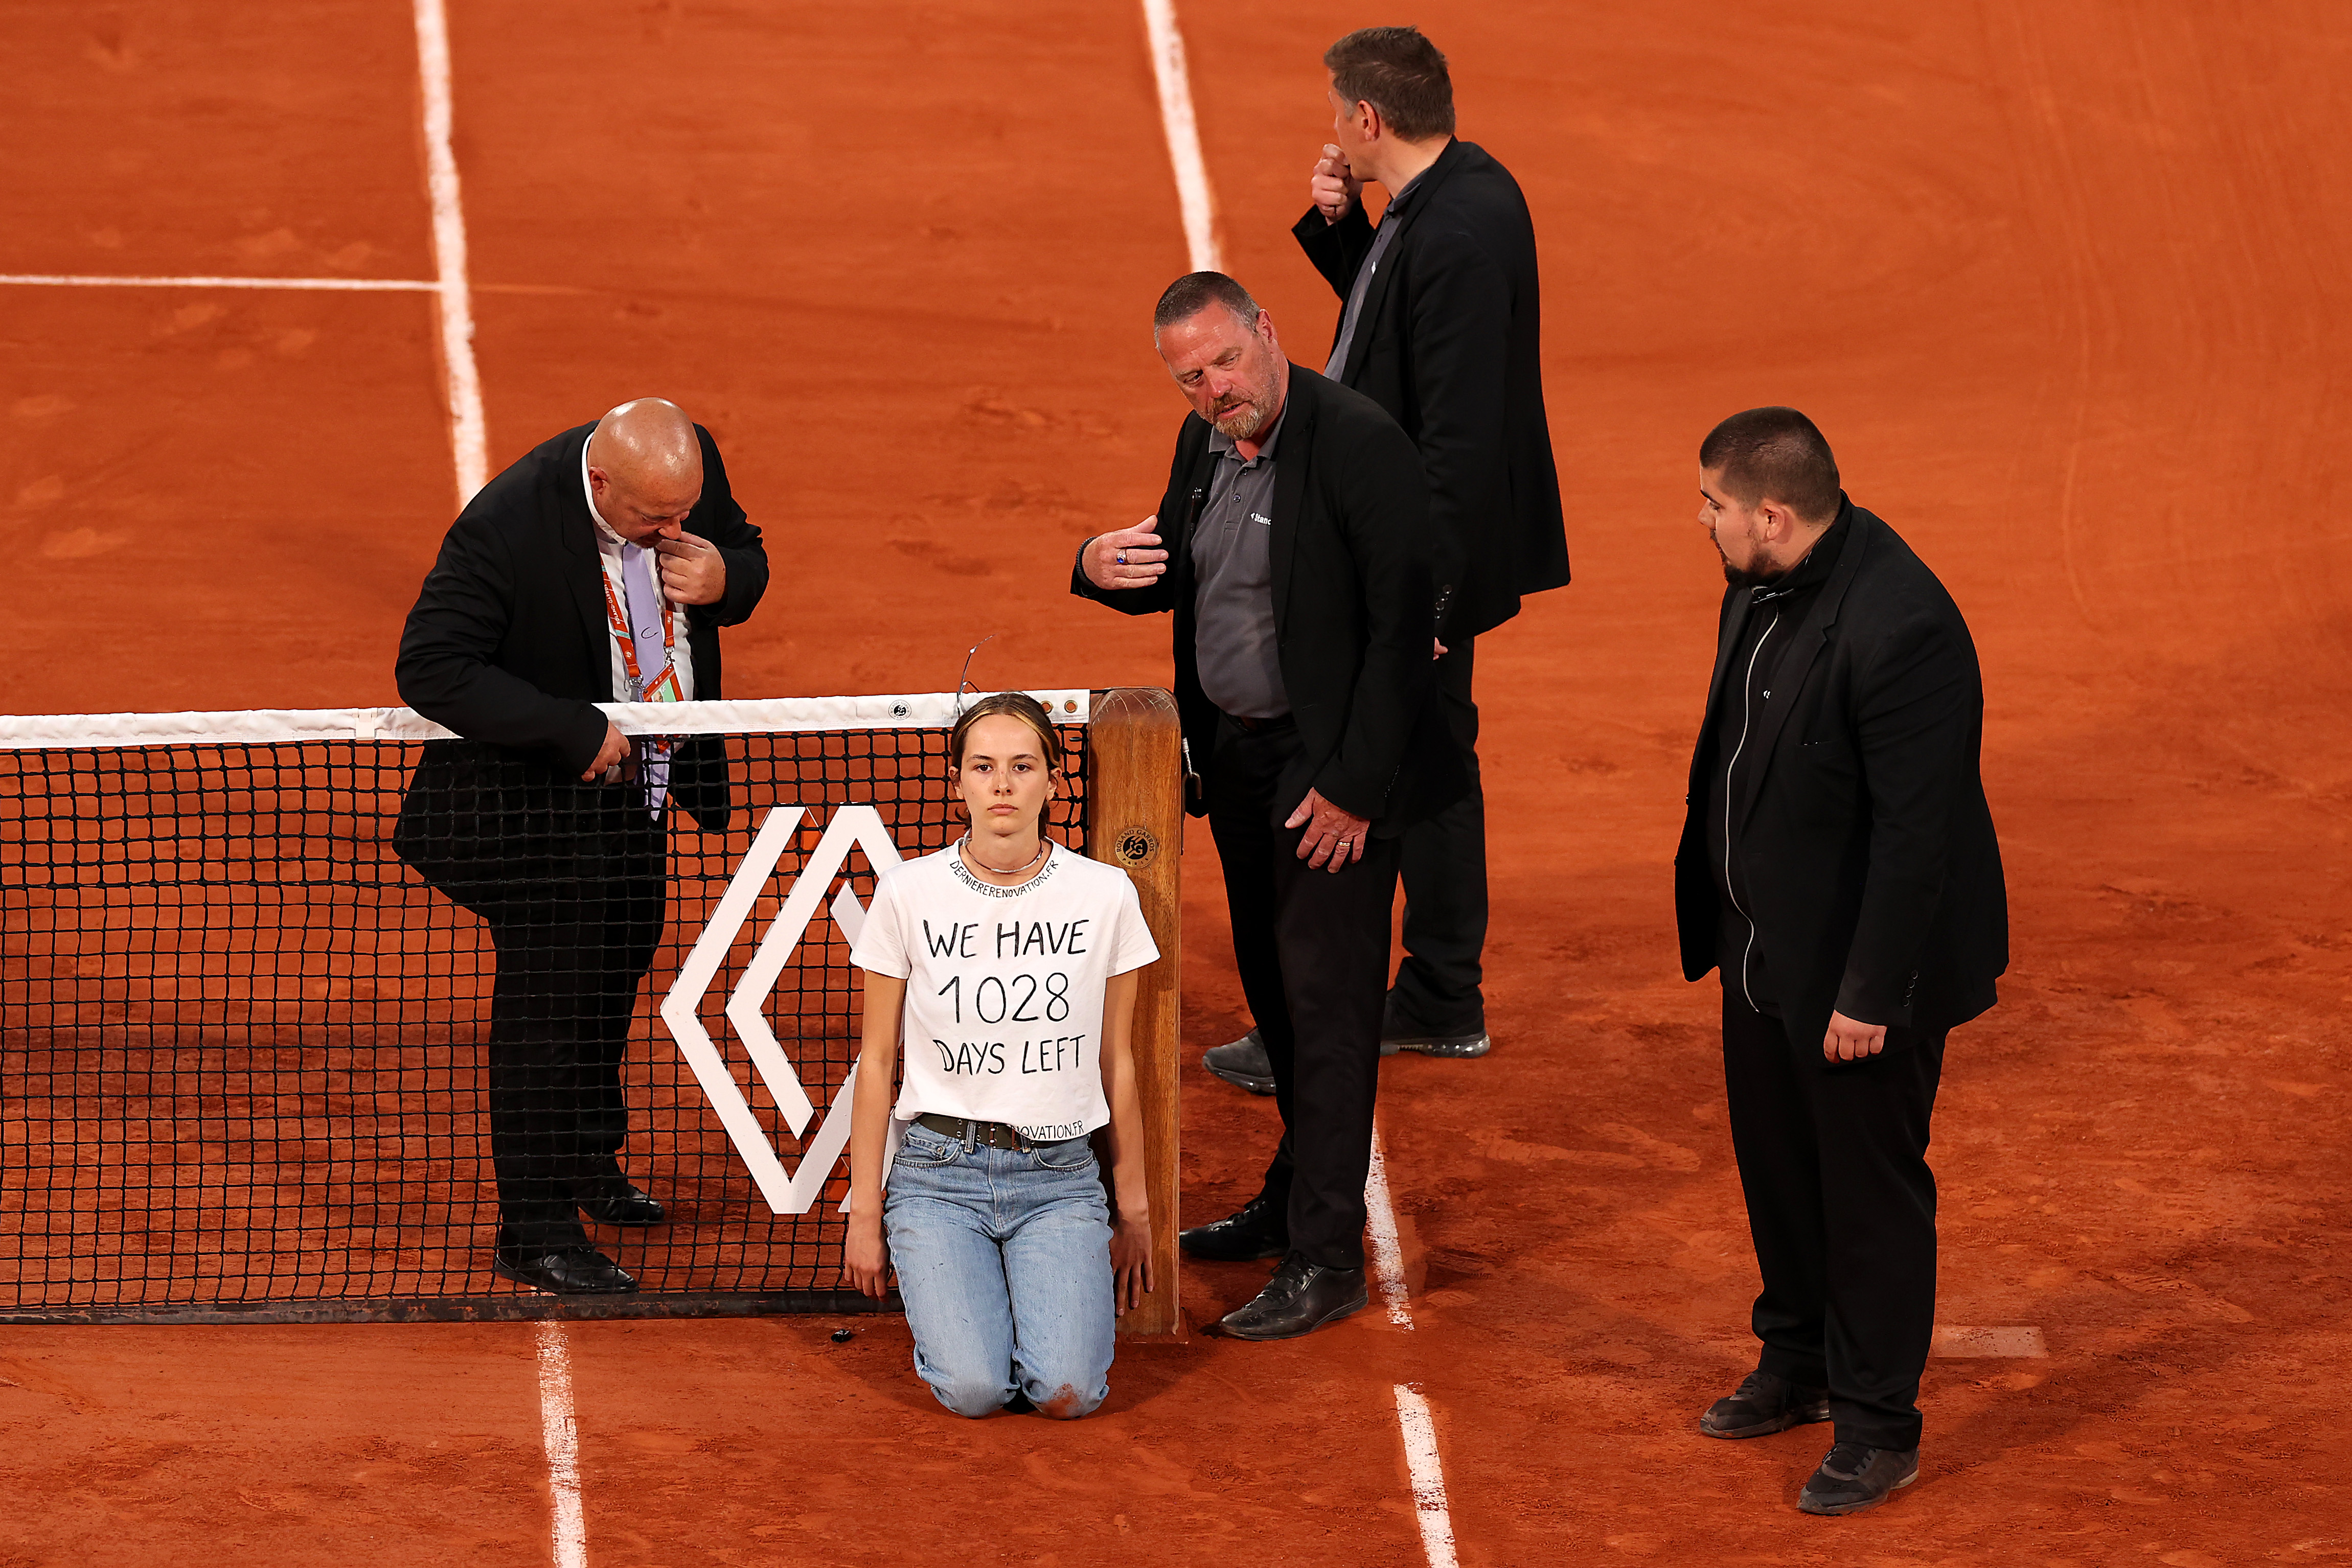 Roland-Garros 2022 Casper Ruud qualifies for final after climate protestor stops play